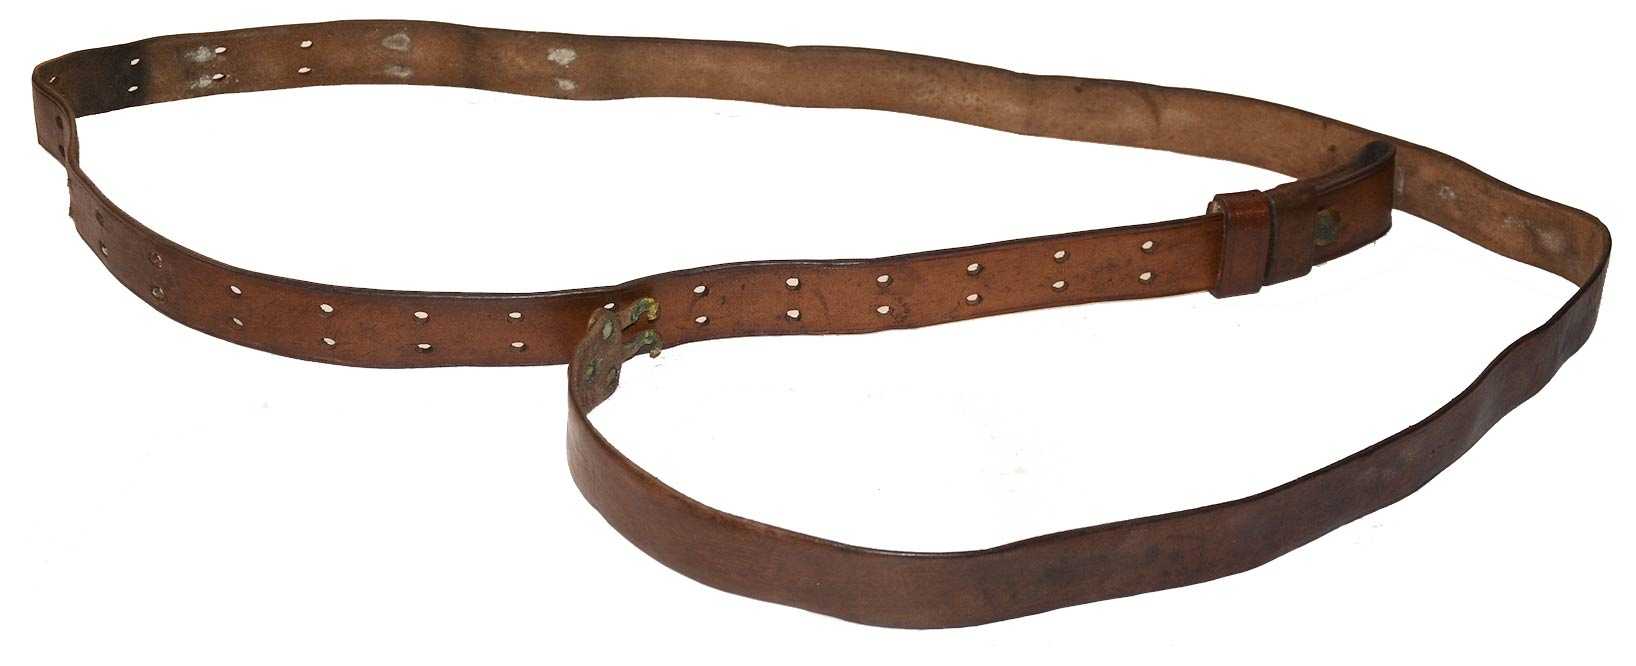 ARSENAL MARKED SLING FOR USE ON THE 45/70 KRAG — Horse Soldier